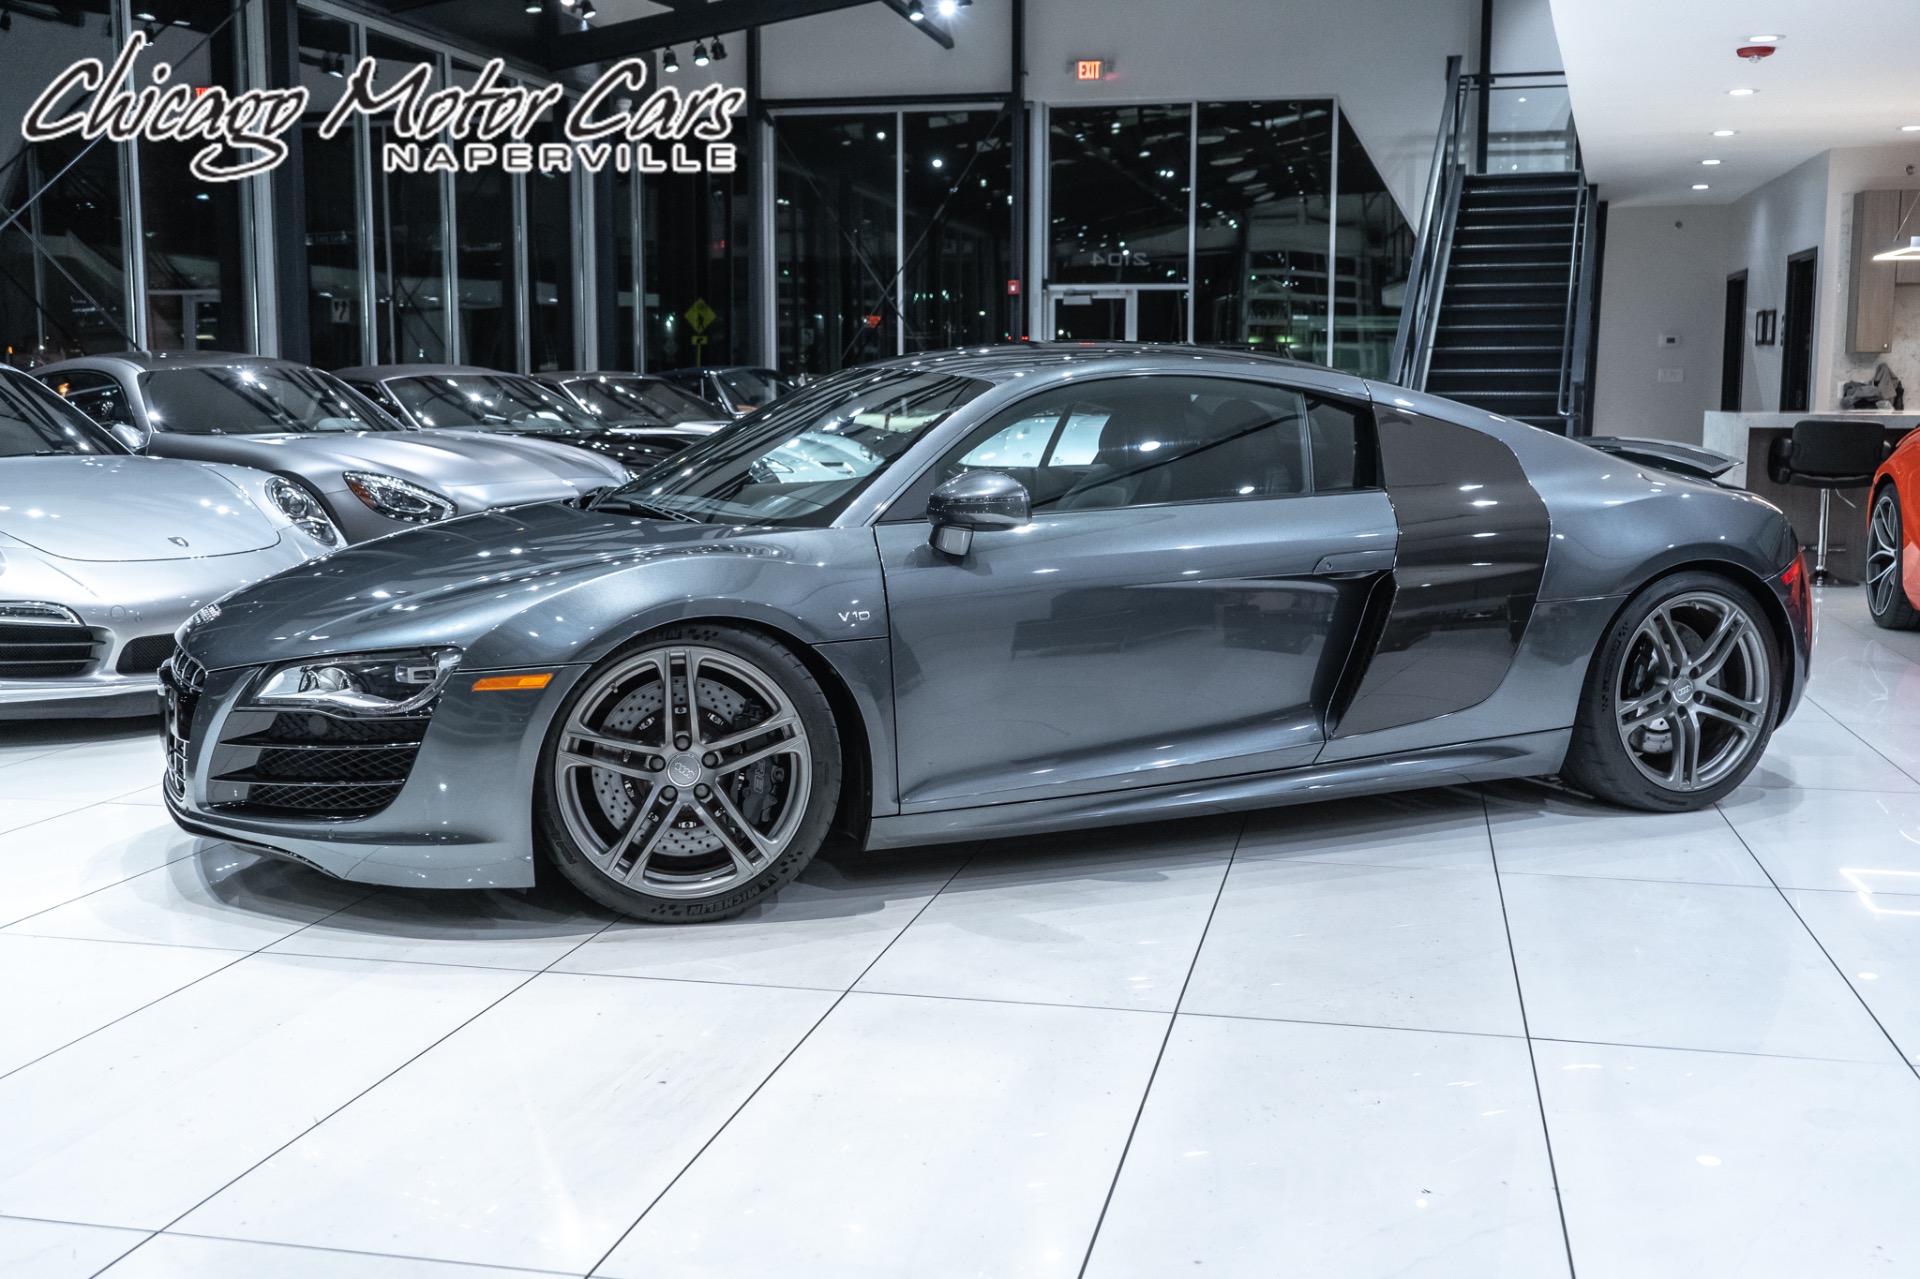 Used-2010-Audi-R8-V10-Coupe-Gated-6-Speed-Twin-Turbo-Just-Fully-Serviced-wRecords